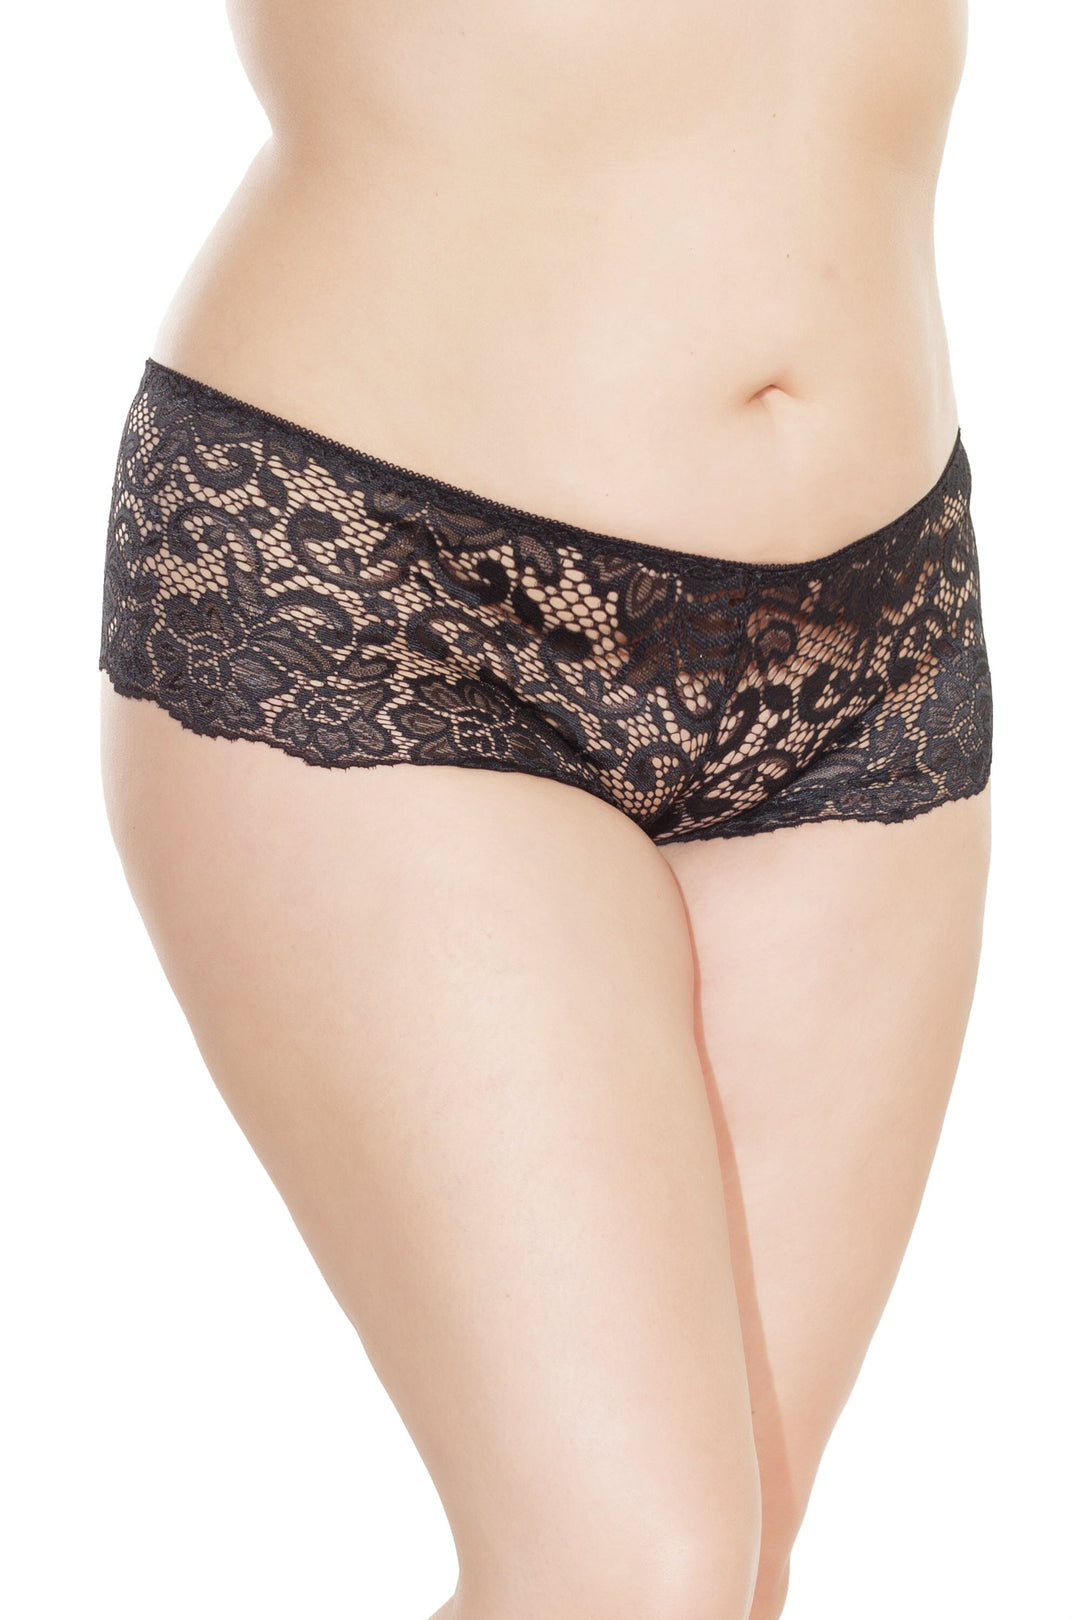 Low Rise Lace Booty Short | Plus Size-Booty Shorts-Coquette-Black-Q-SEXYSHOES.COM